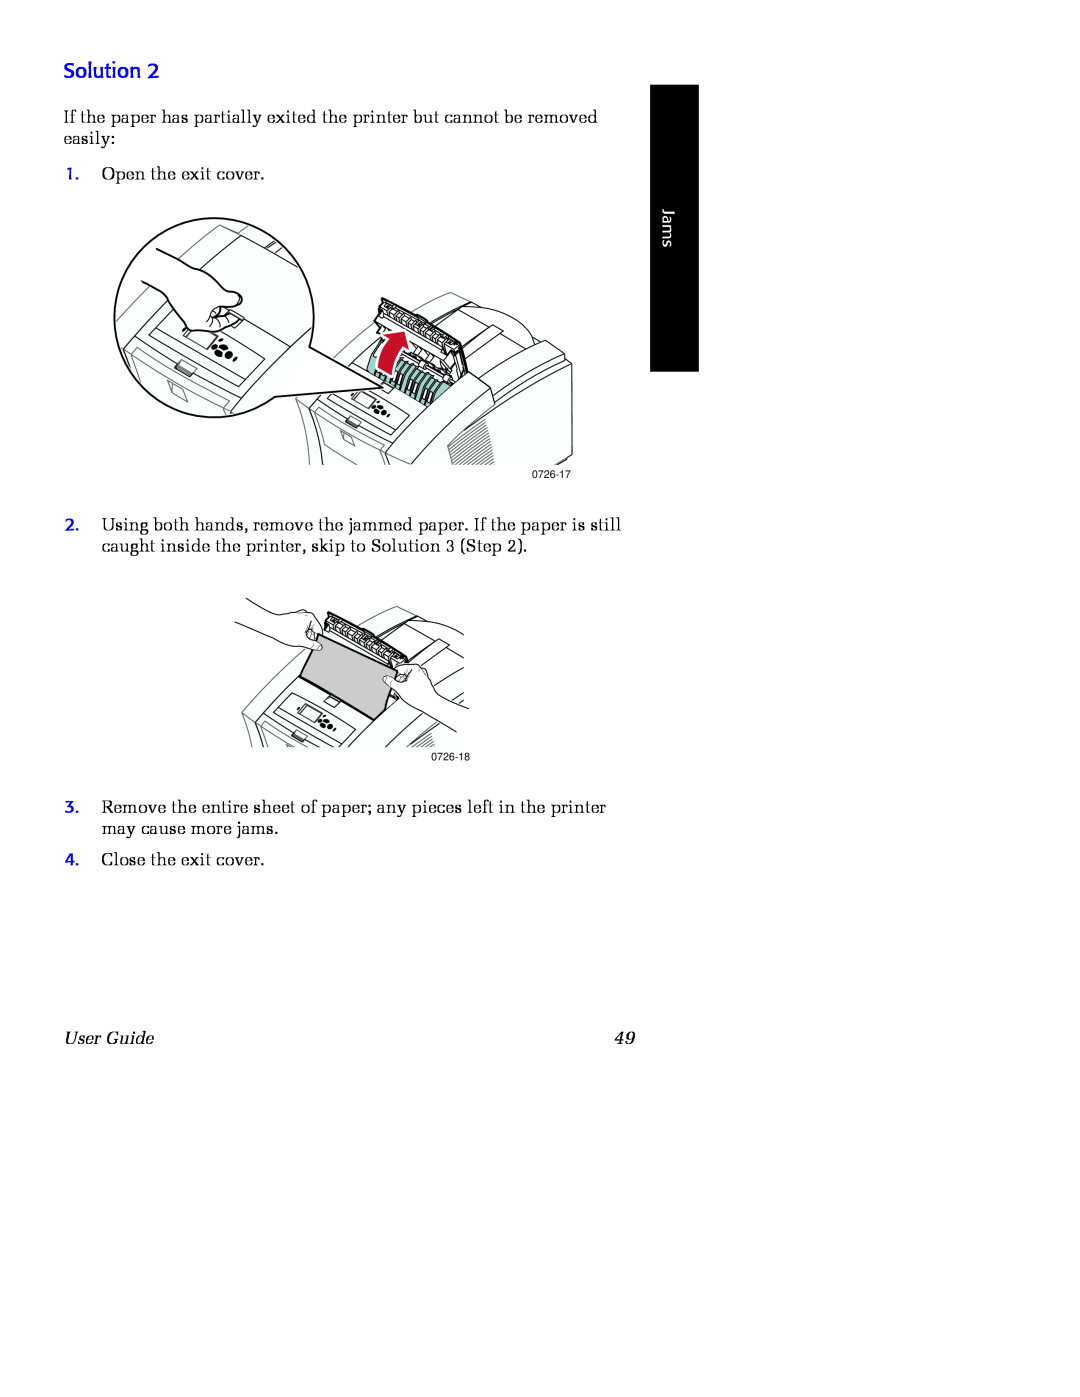 Xerox Phaser 860 manual Open the exit cover, Jams, User Guide 